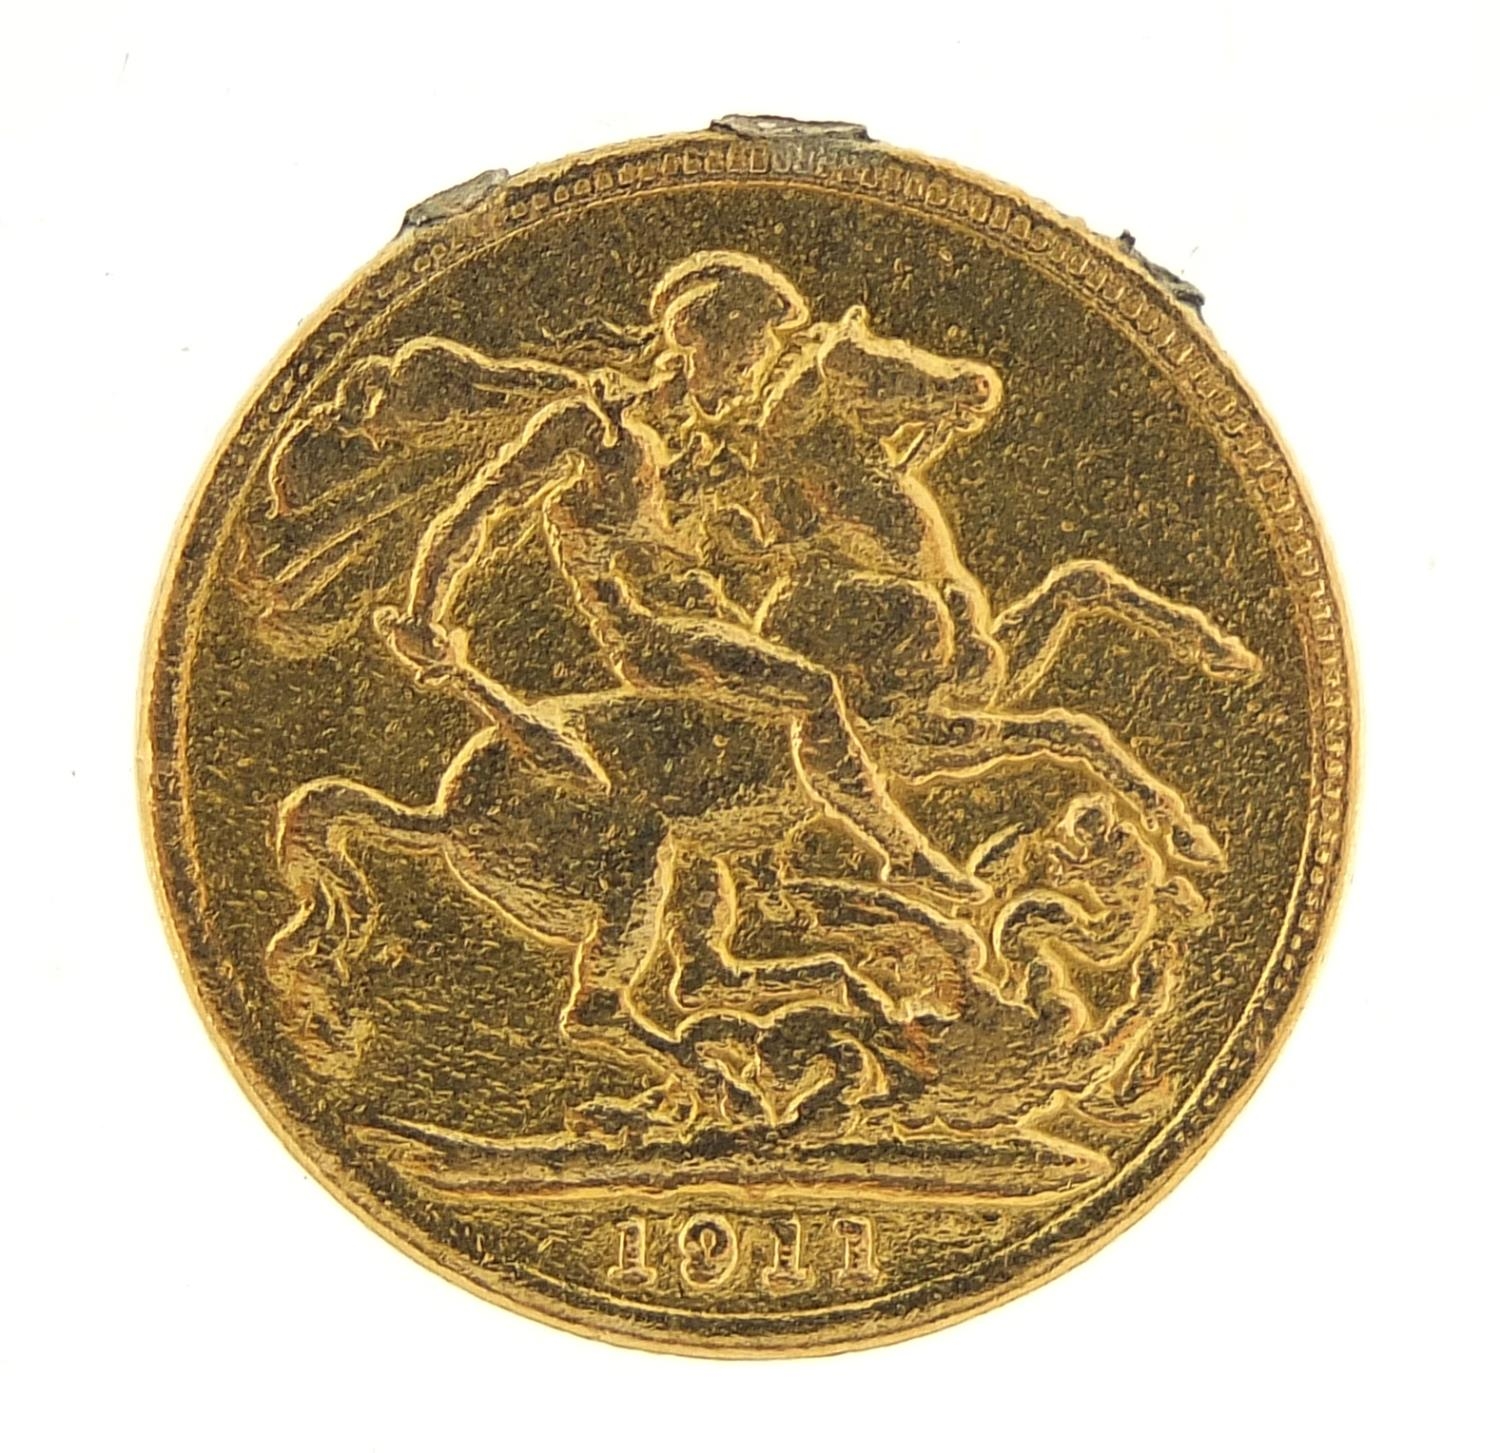 George V 1911 gold sovereign - this lot is sold without buyer?s premium, the hammer price is the